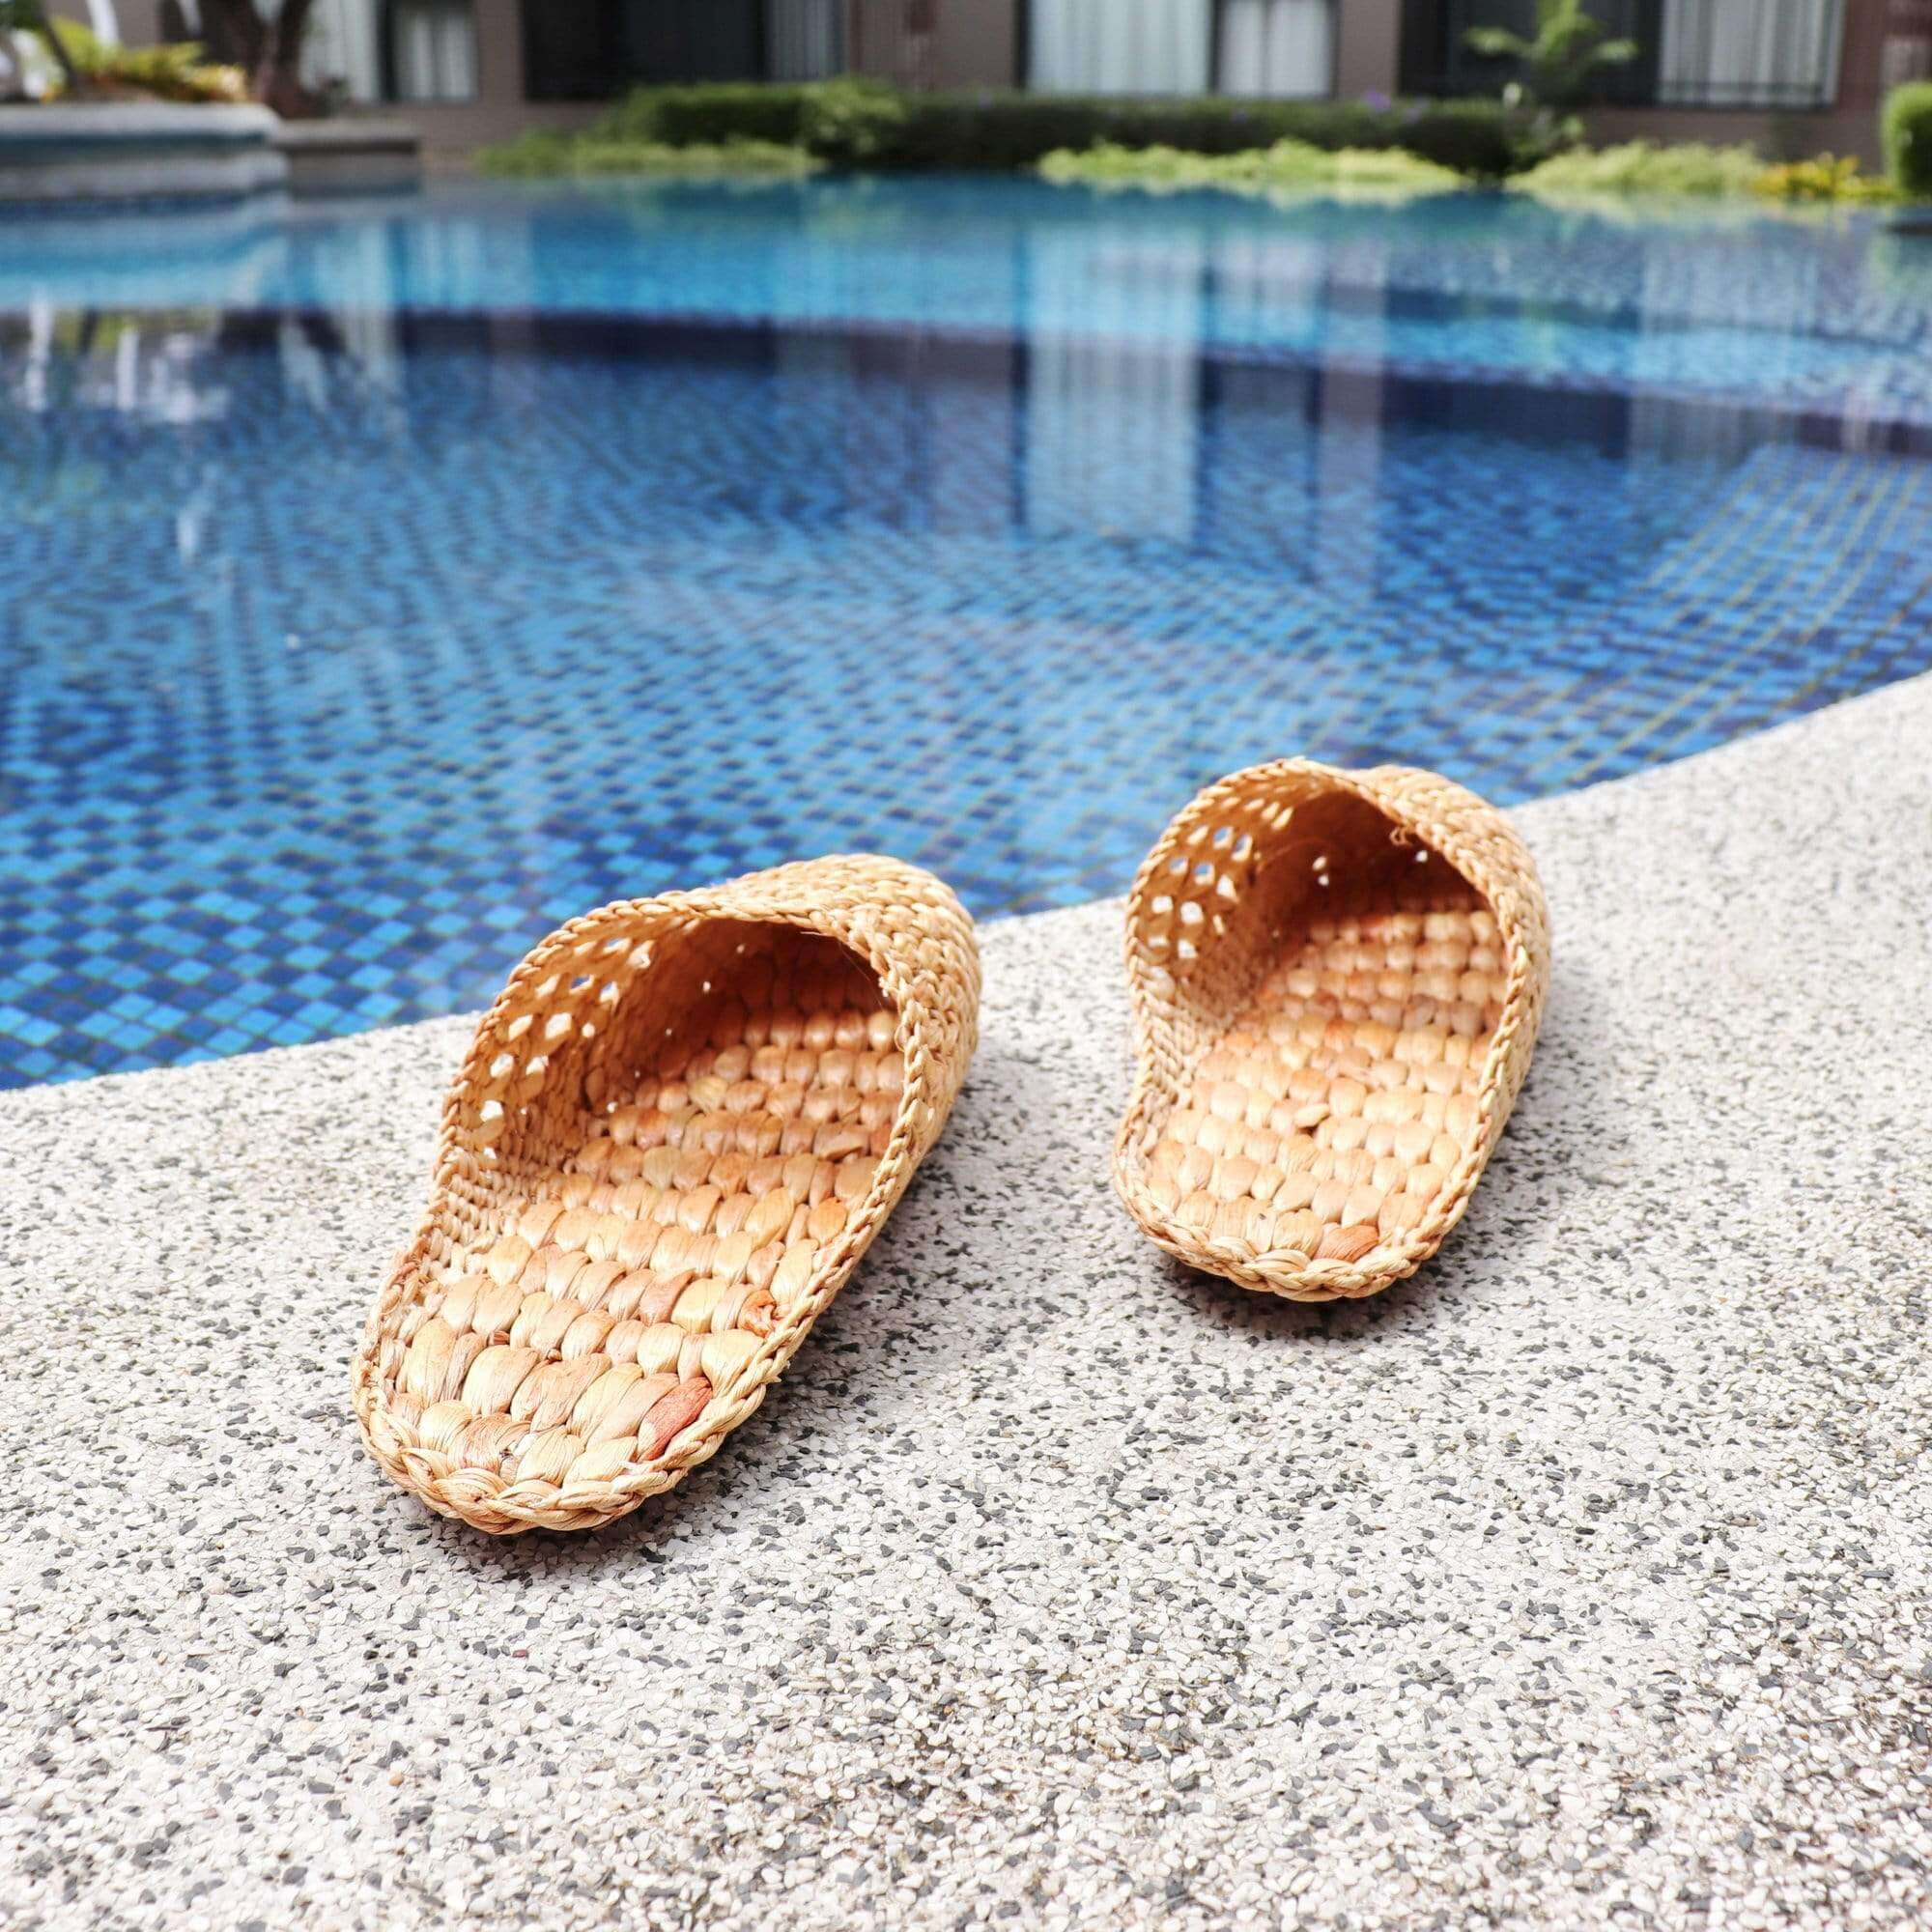 PI WA RA Handicraft Straw Slipper Shoe: Unmatched Comfort for Relaxation